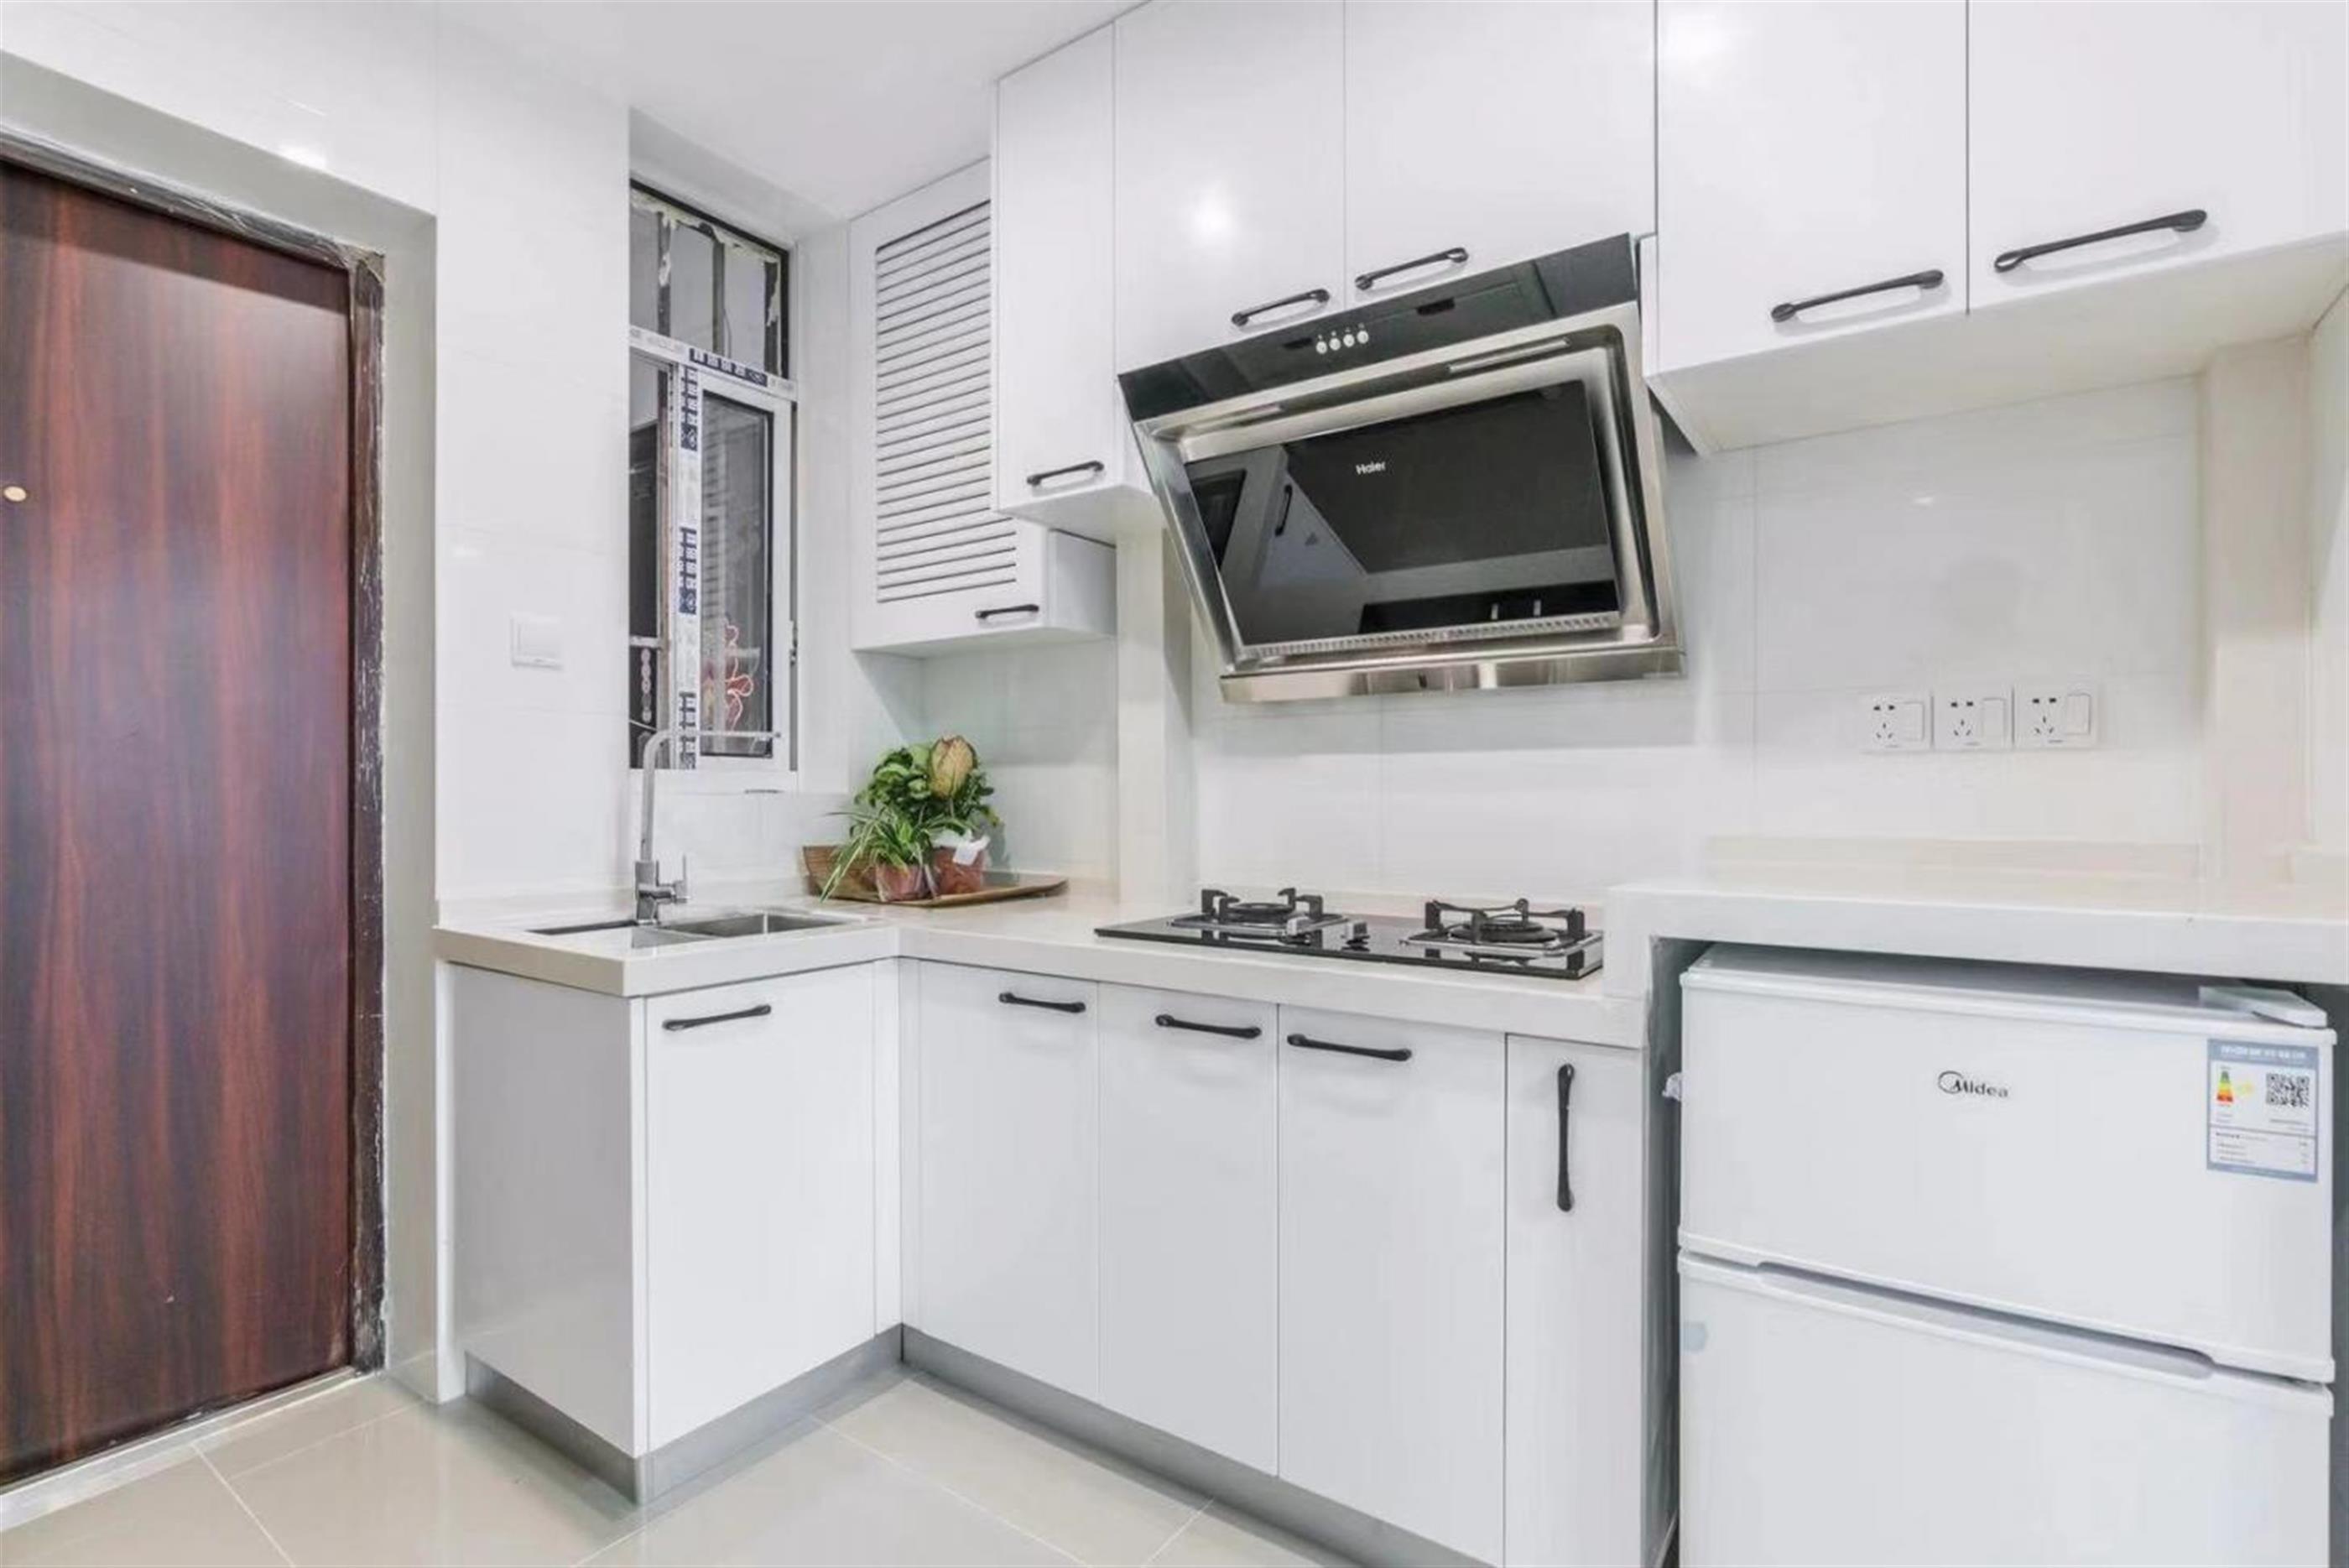 new kitchen Renovated Bright Spacious 1BR Walk-up Apt Nr LN 3/4 for Rent in Shanghai